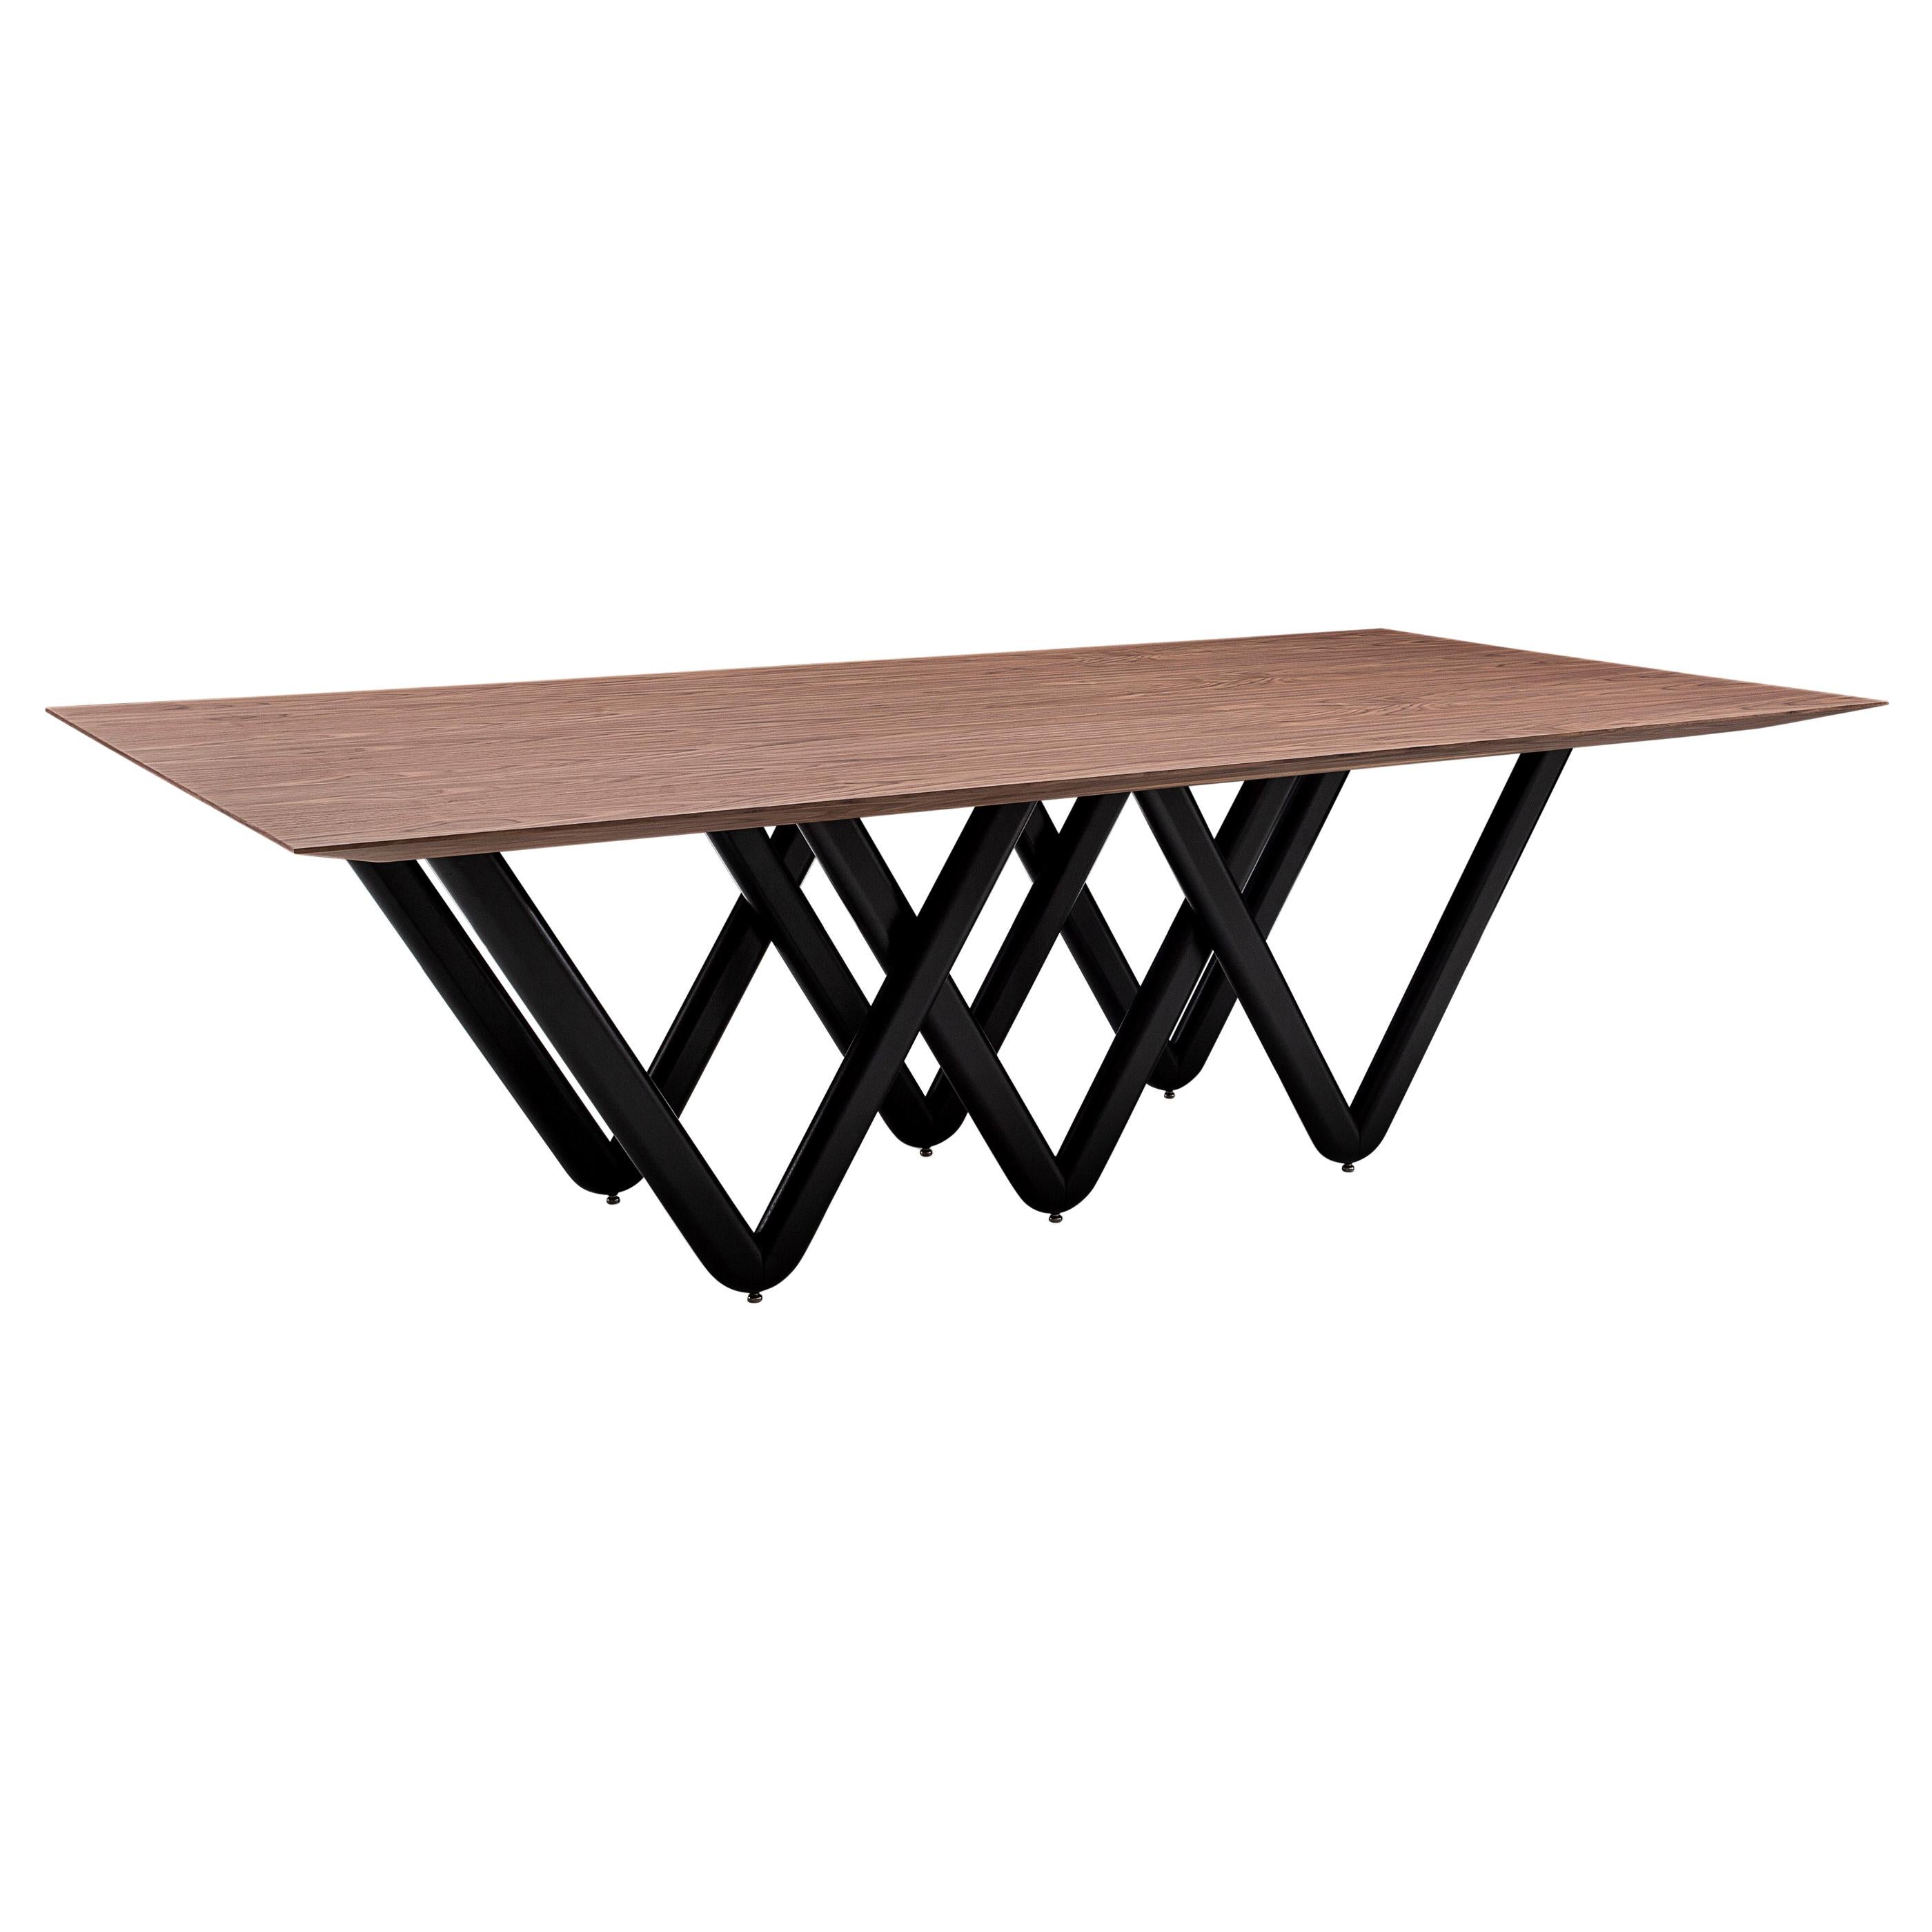 The Dablio dining table features a black-painted intersecting V-shaped base that is highlighted by a stunning Walnut veneered tabletop. It has a very singular and original structure and at the same time, it is a very simple but modern dining table.